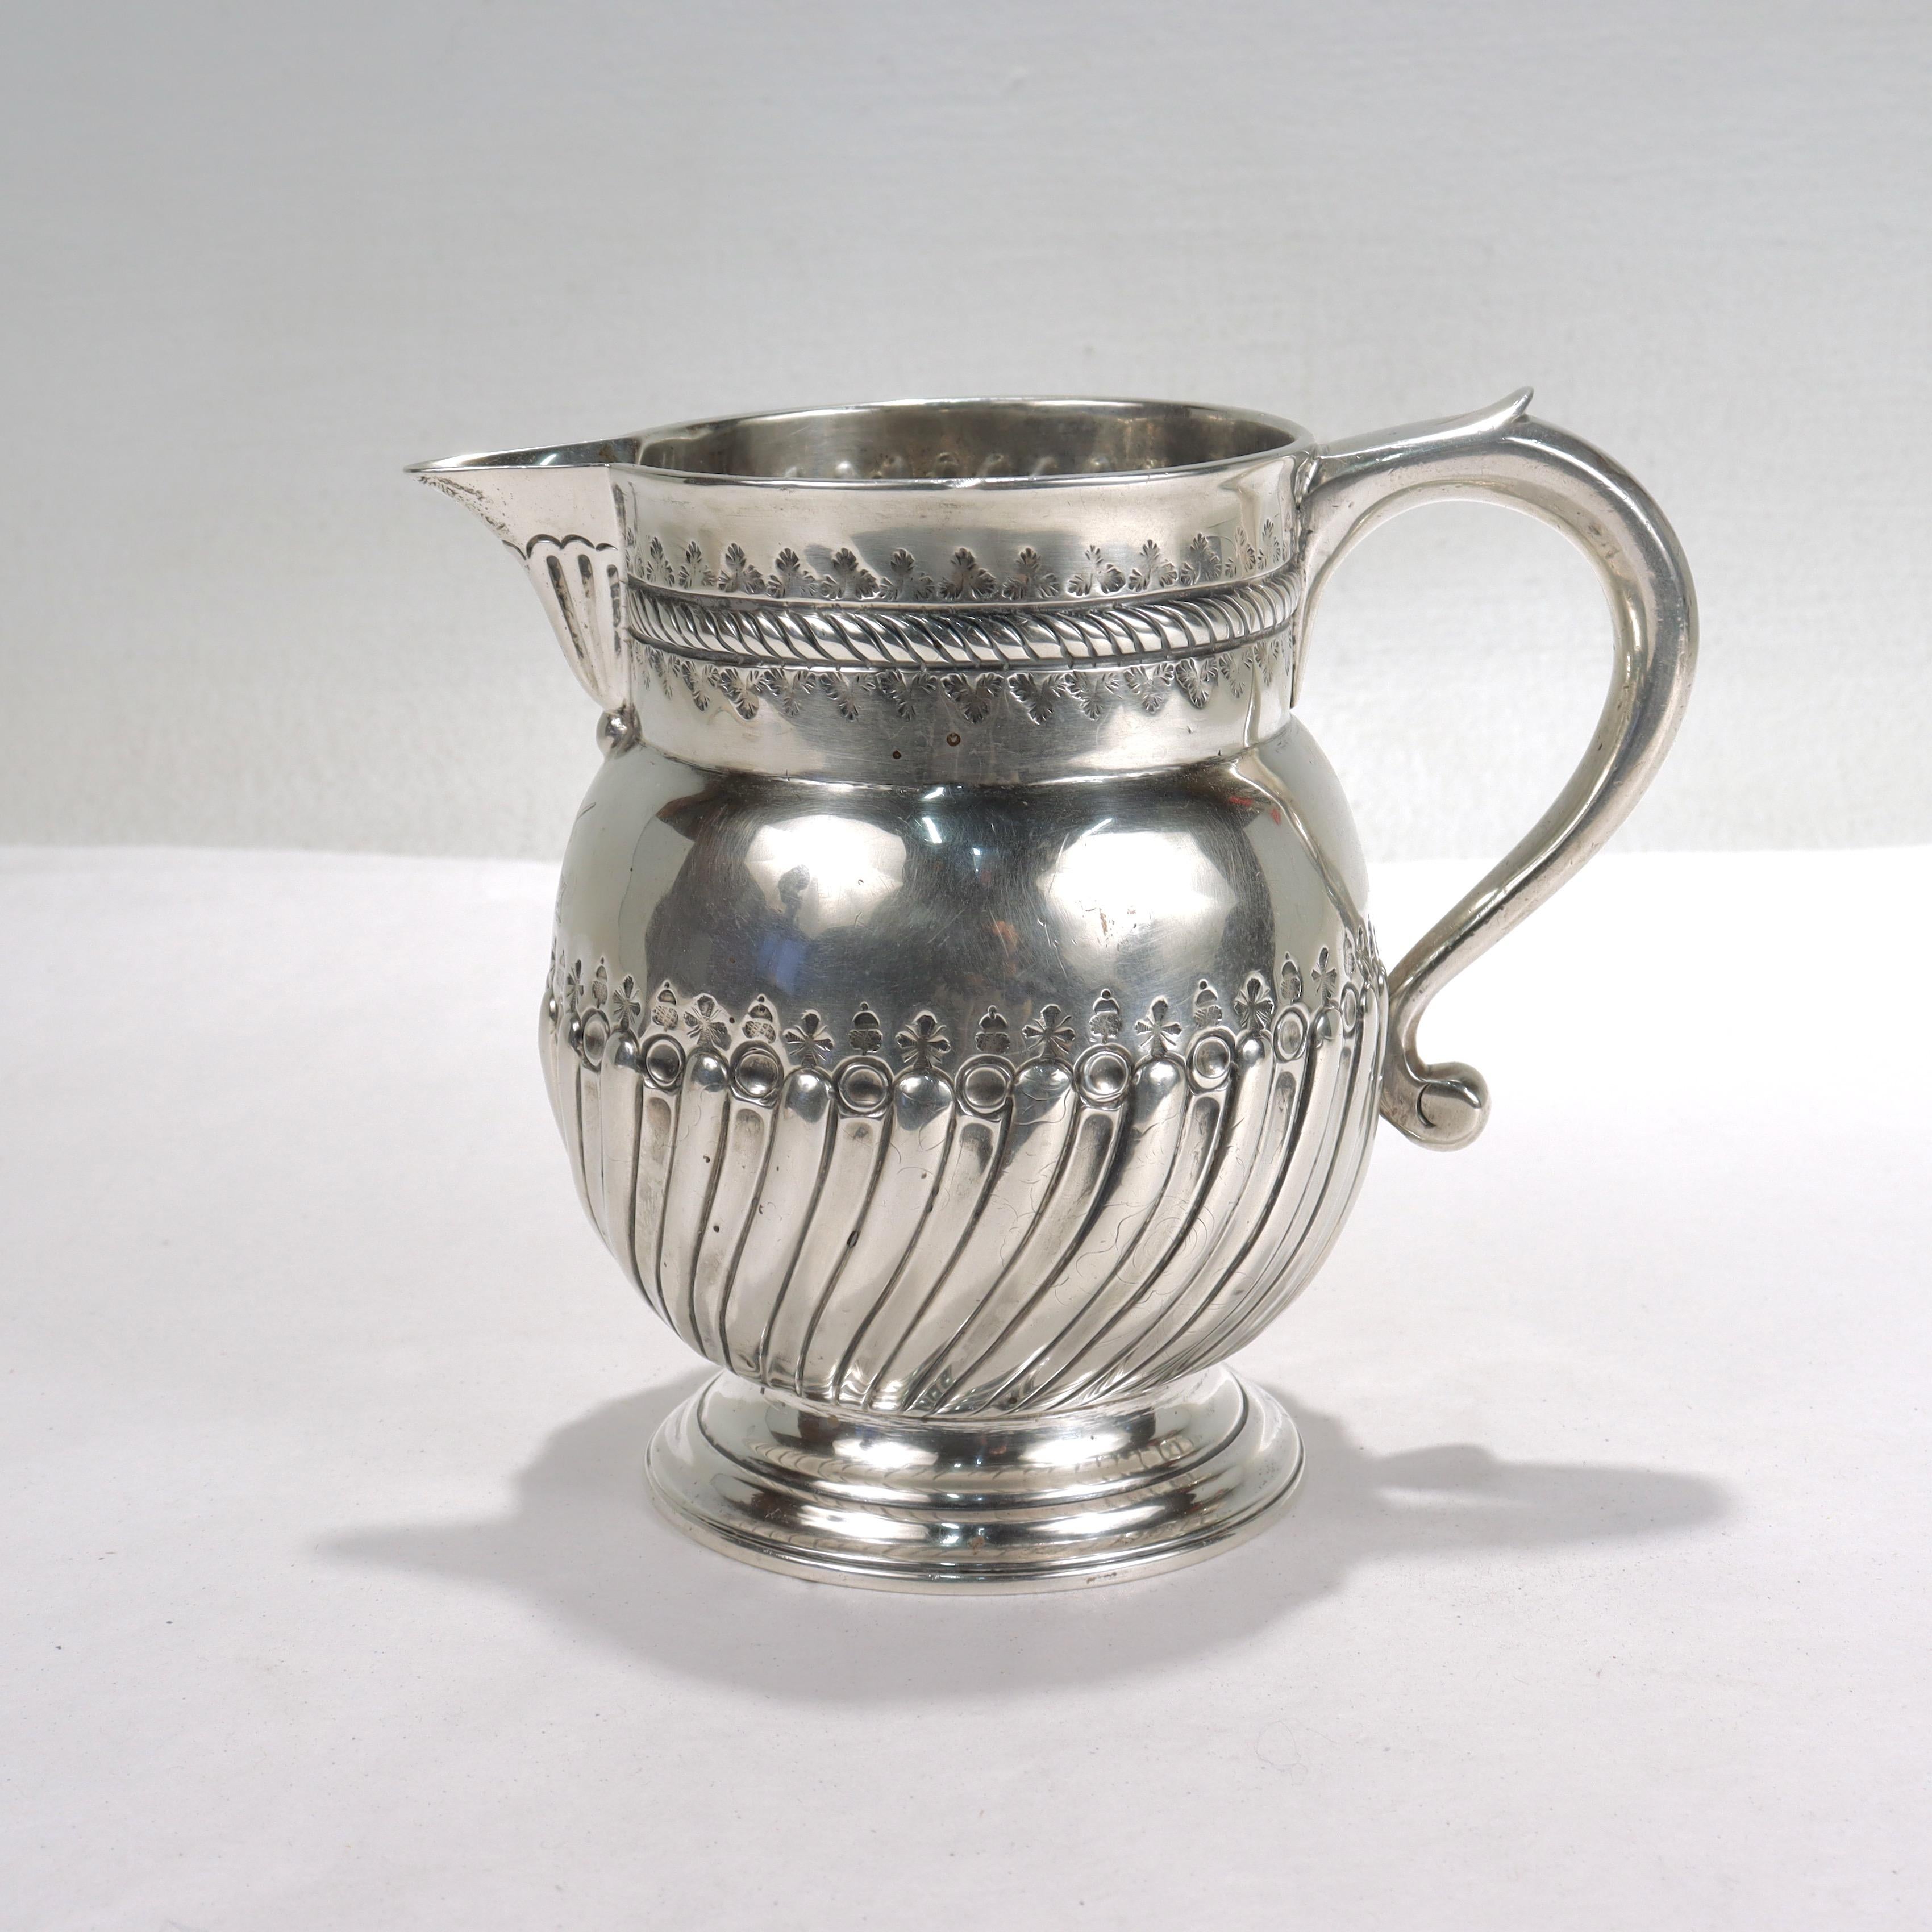 A fine antique, early 18th century English silver milk jug.

In Britannia silver.

Made by Nathaniel Gulliver.

The jug having punch-work decoration of repeating trefoil leaves to the top and alternating acorns & starbursts above a gadrooned